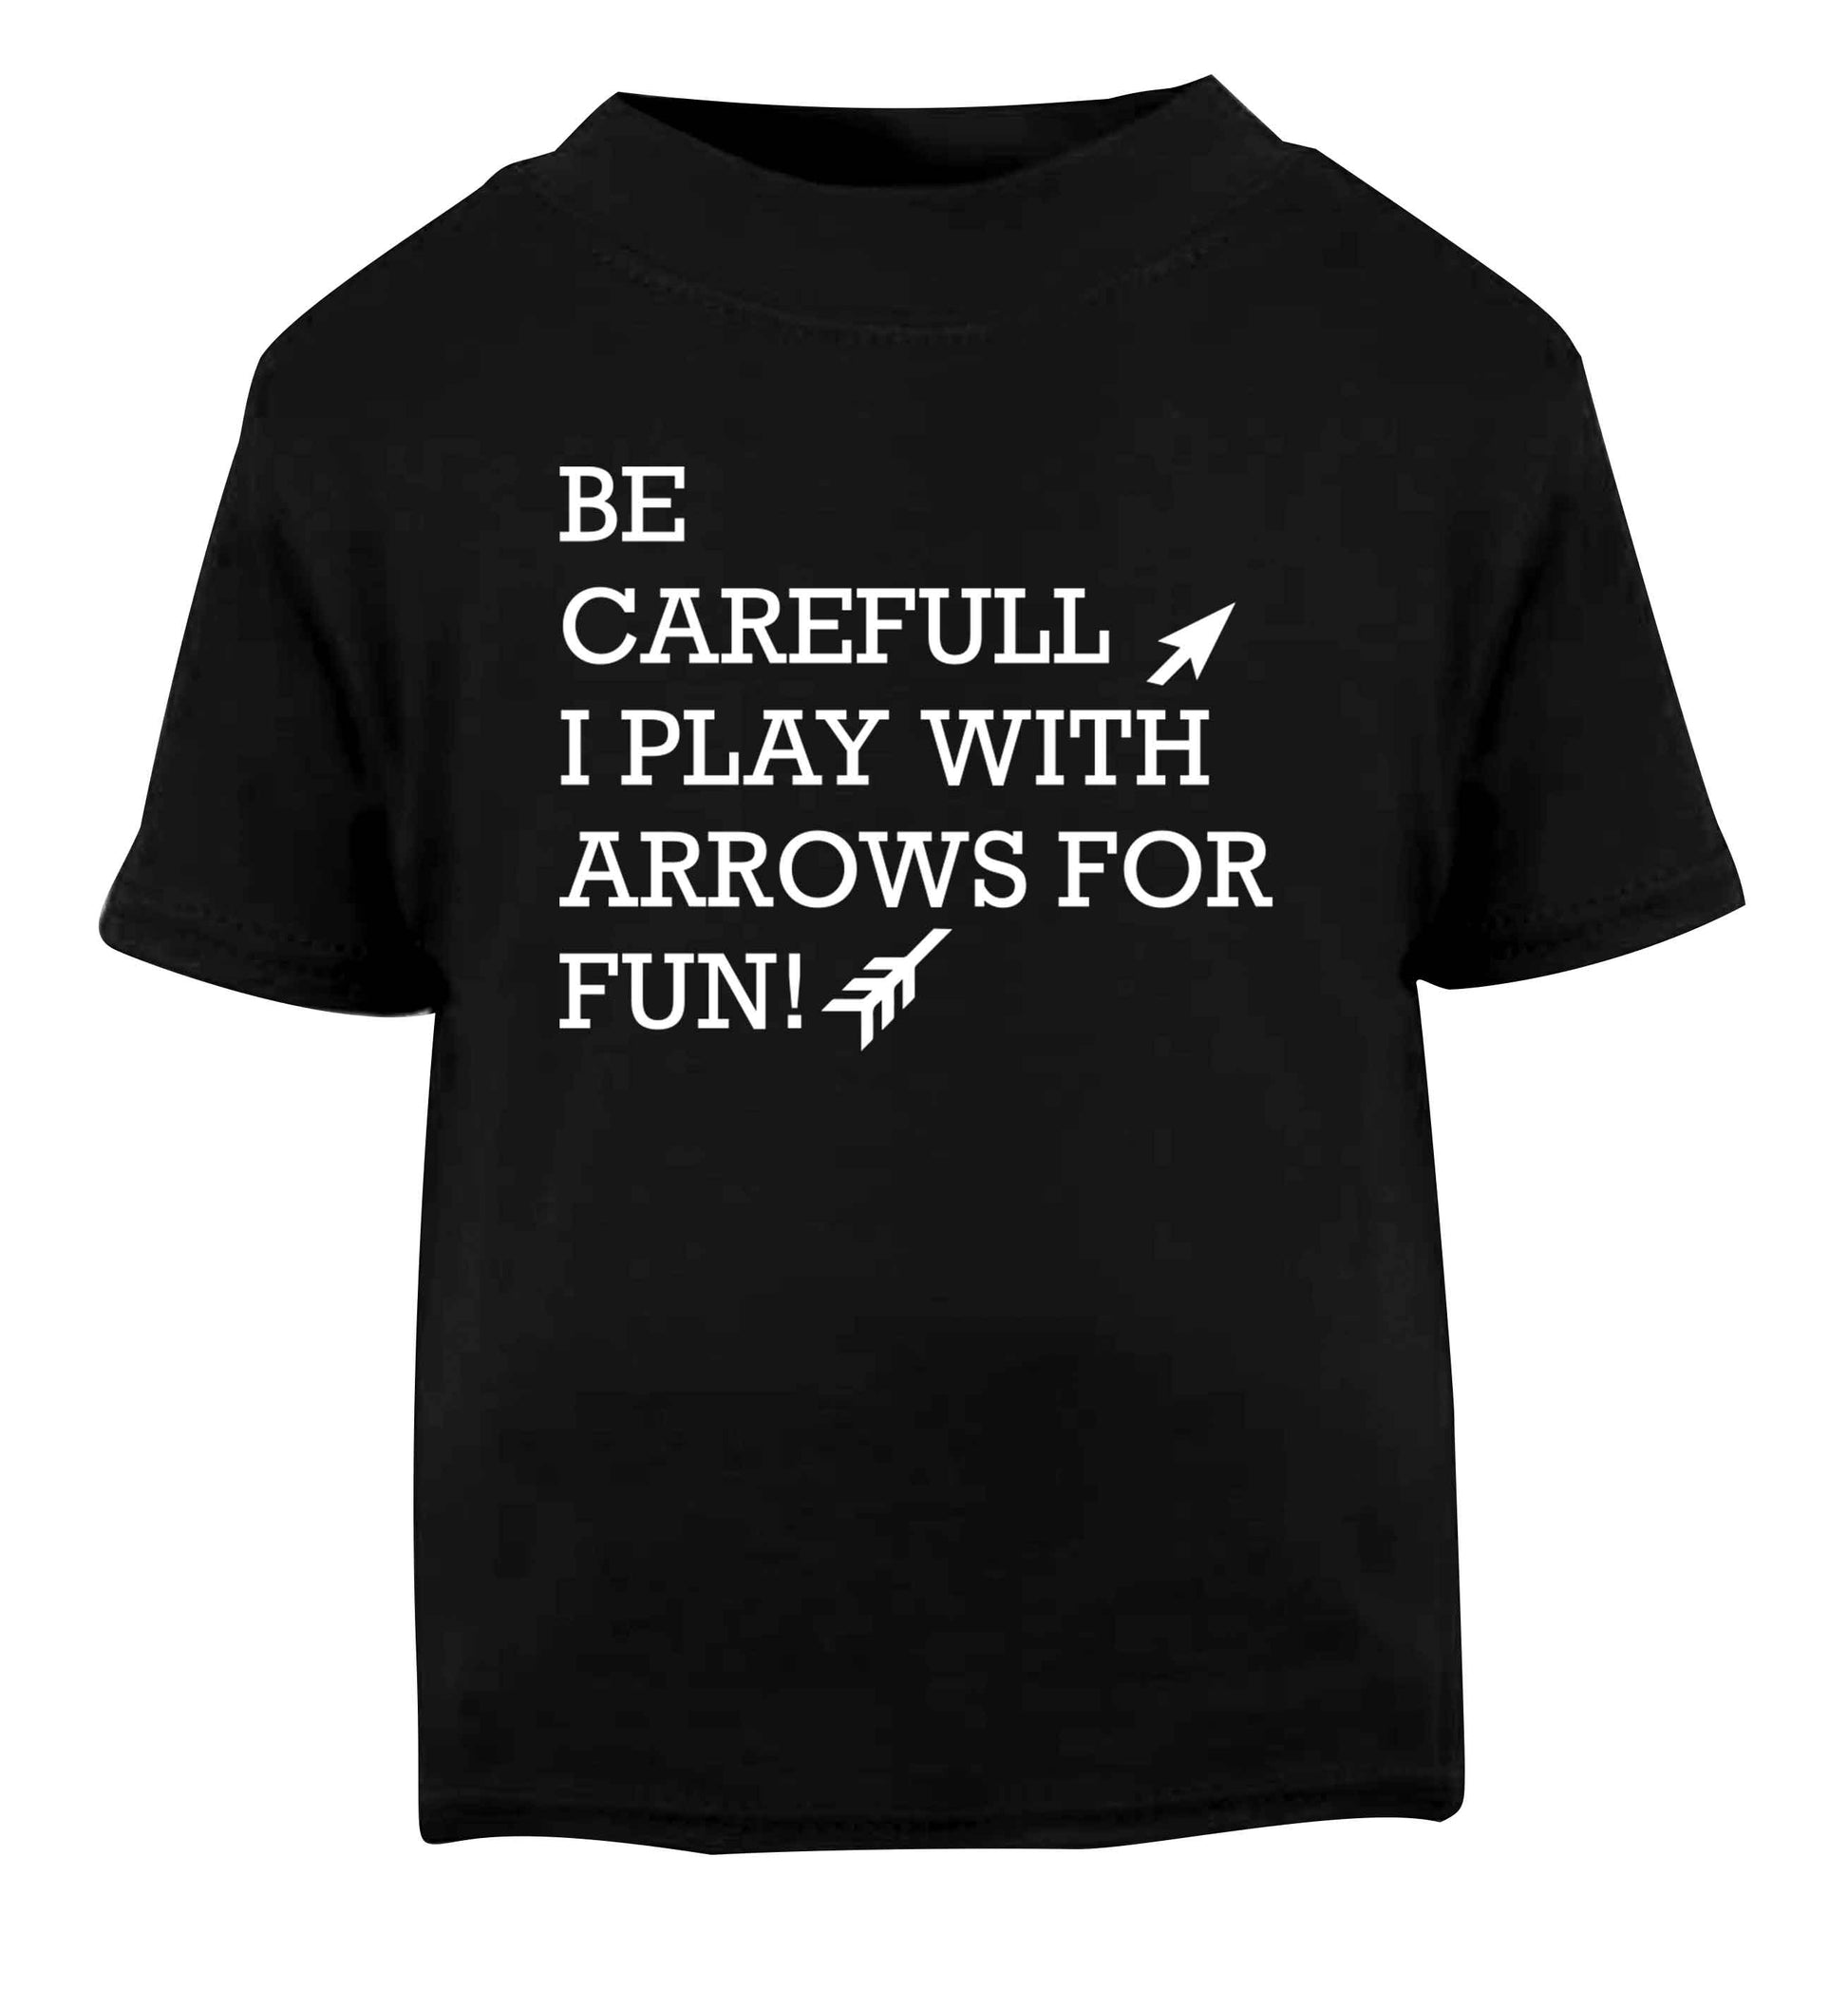 Be carefull I play with arrows for fun Black Baby Toddler Tshirt 2 years